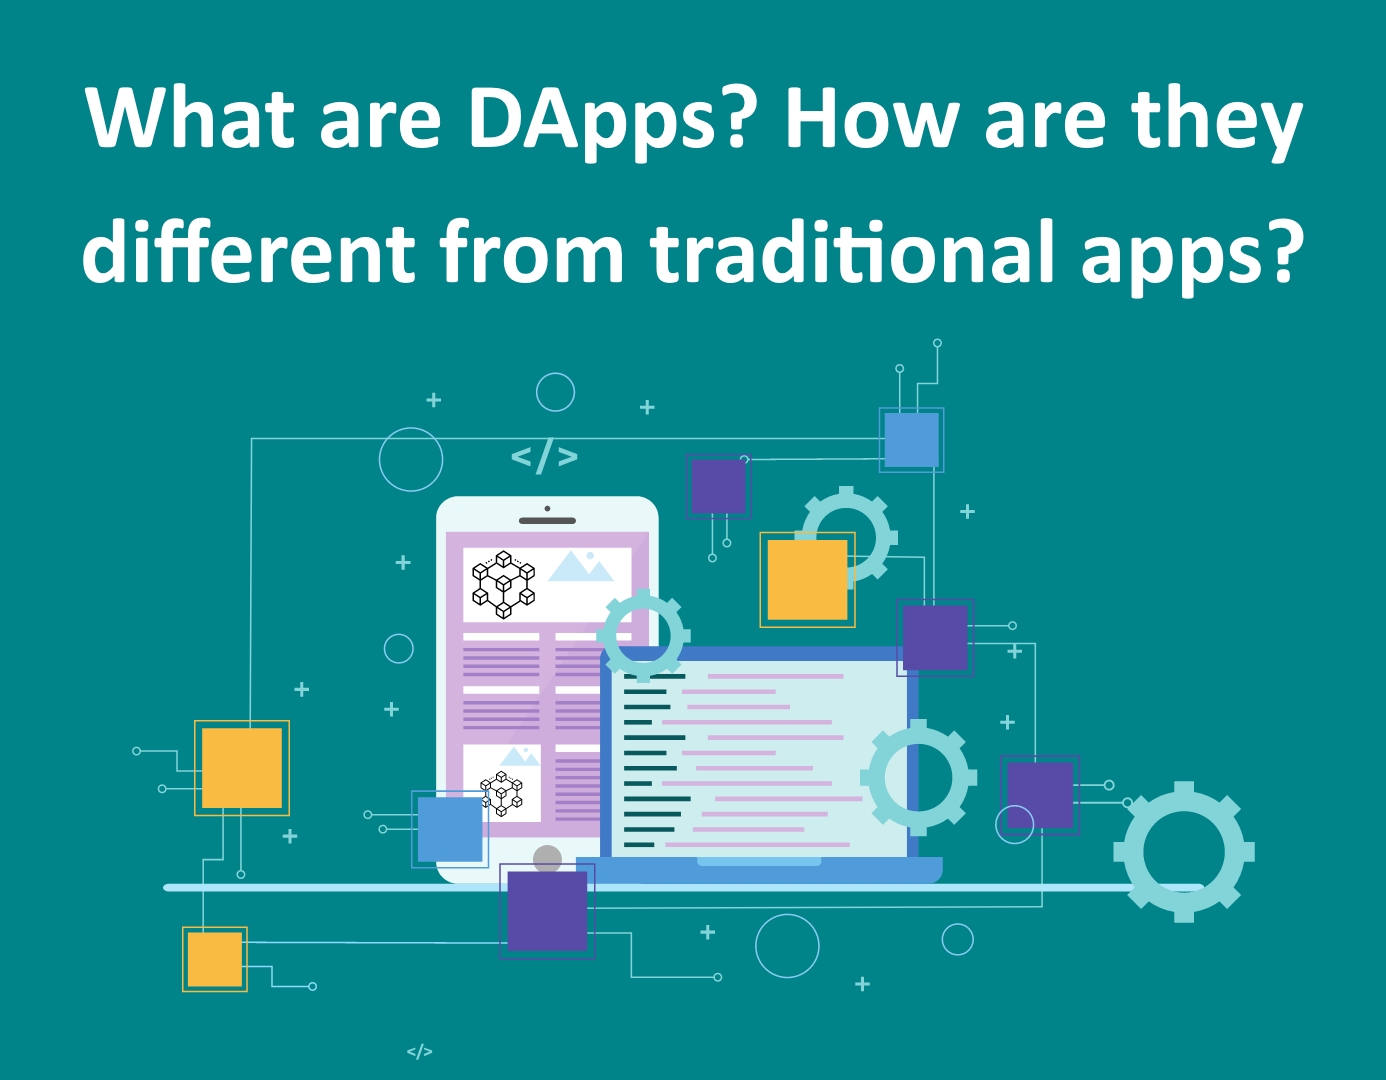 What are DApps? How are they different from traditional apps?